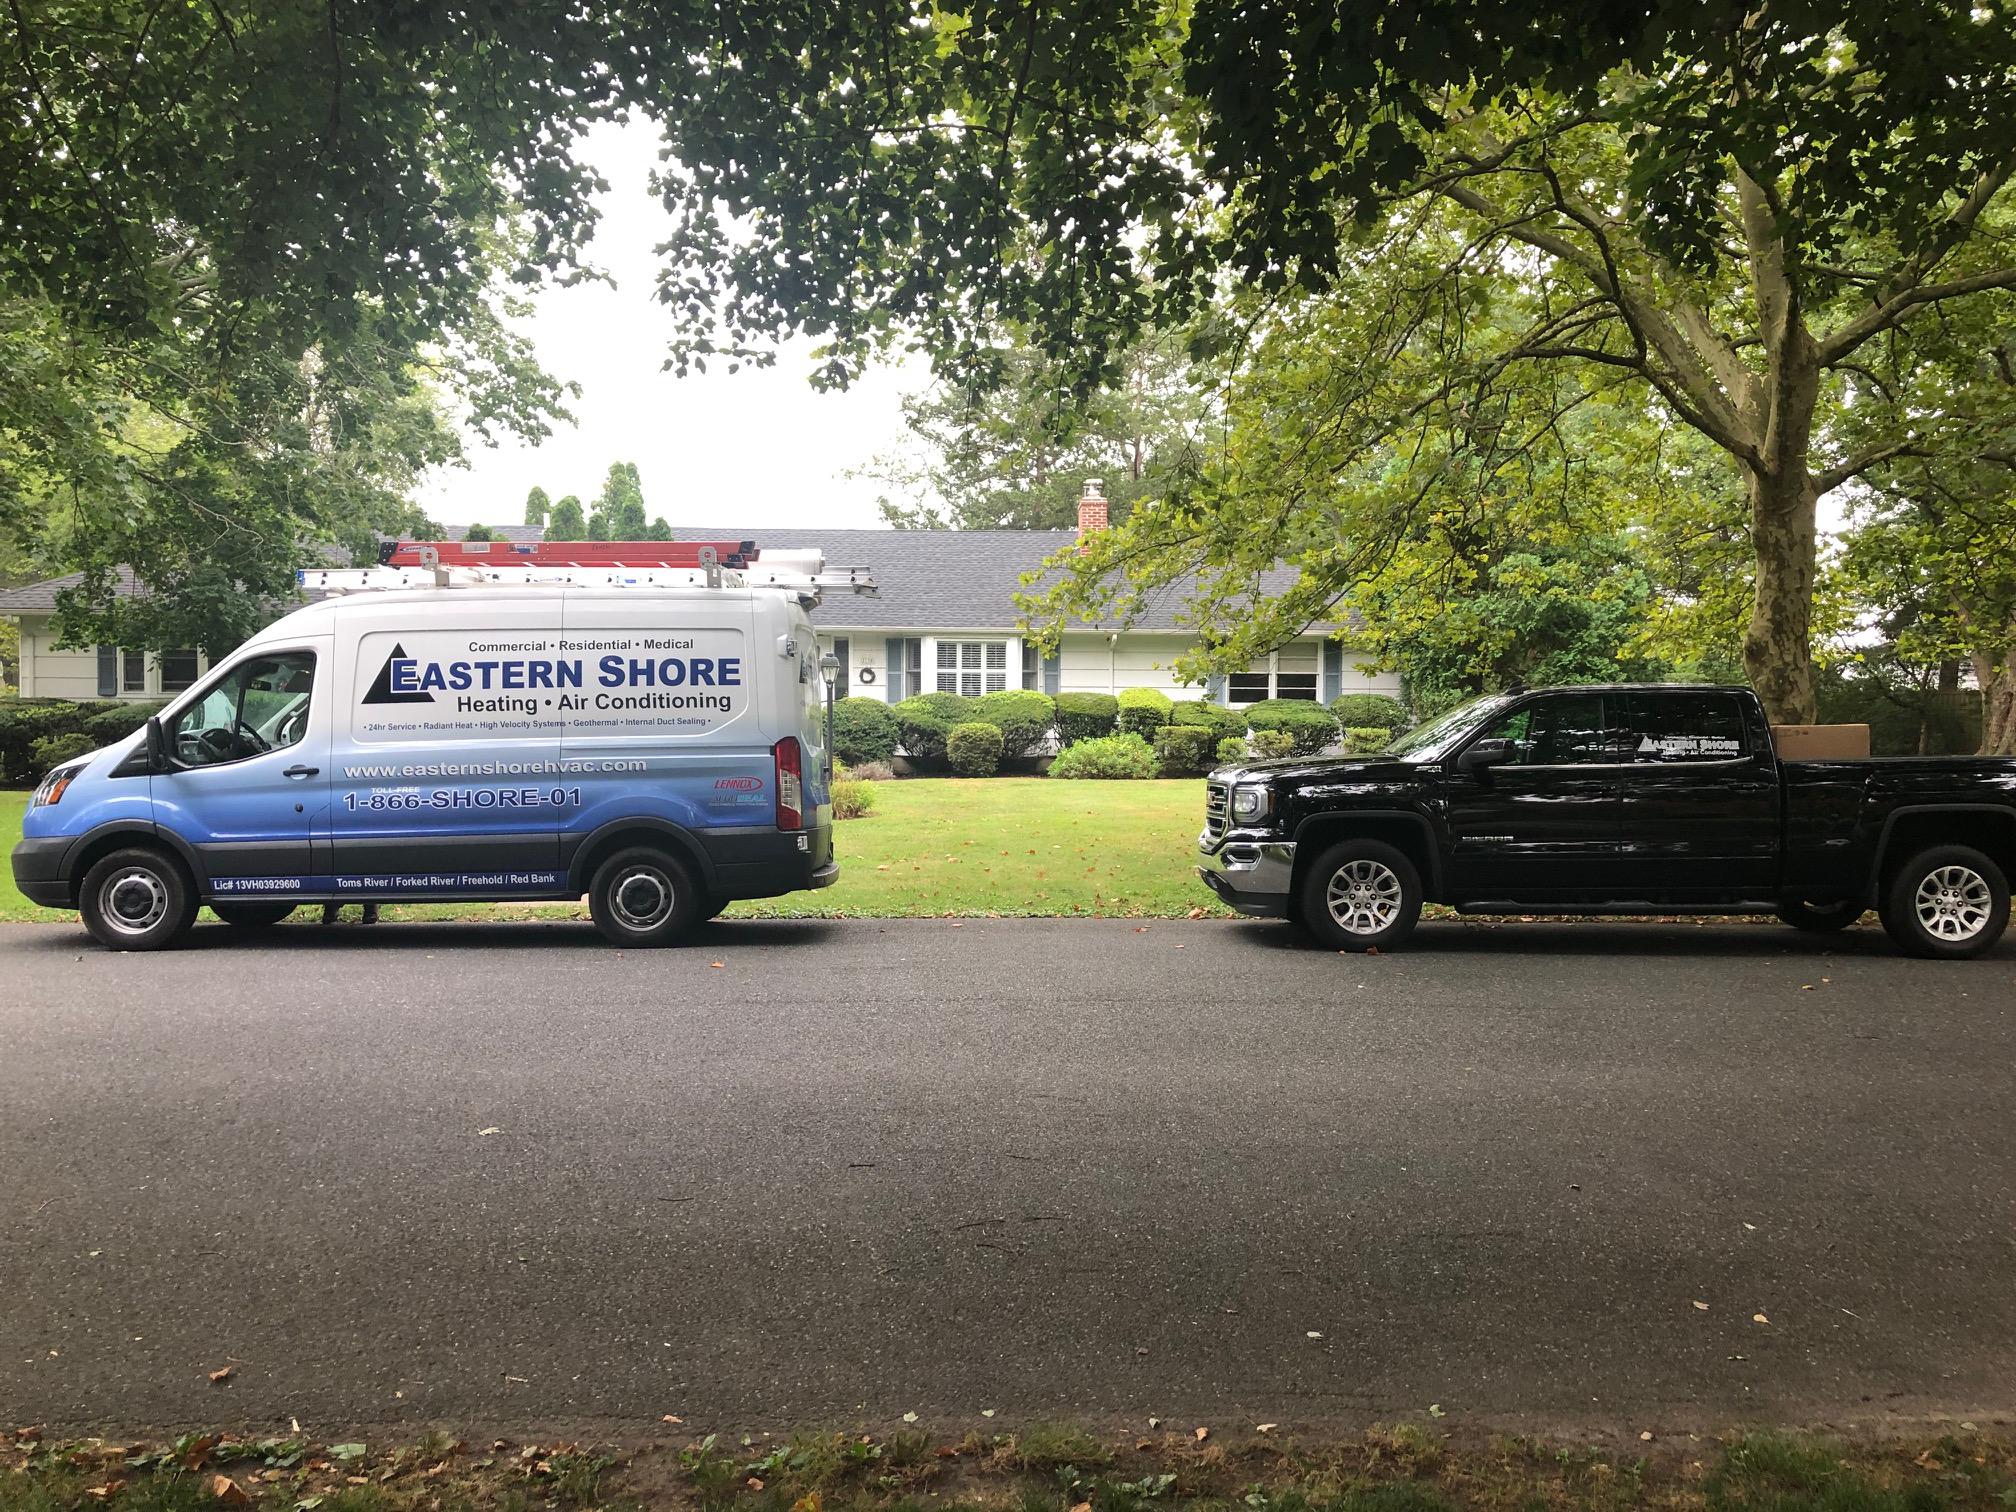 Eastern Shore Heating & Air Conditioning, Inc.